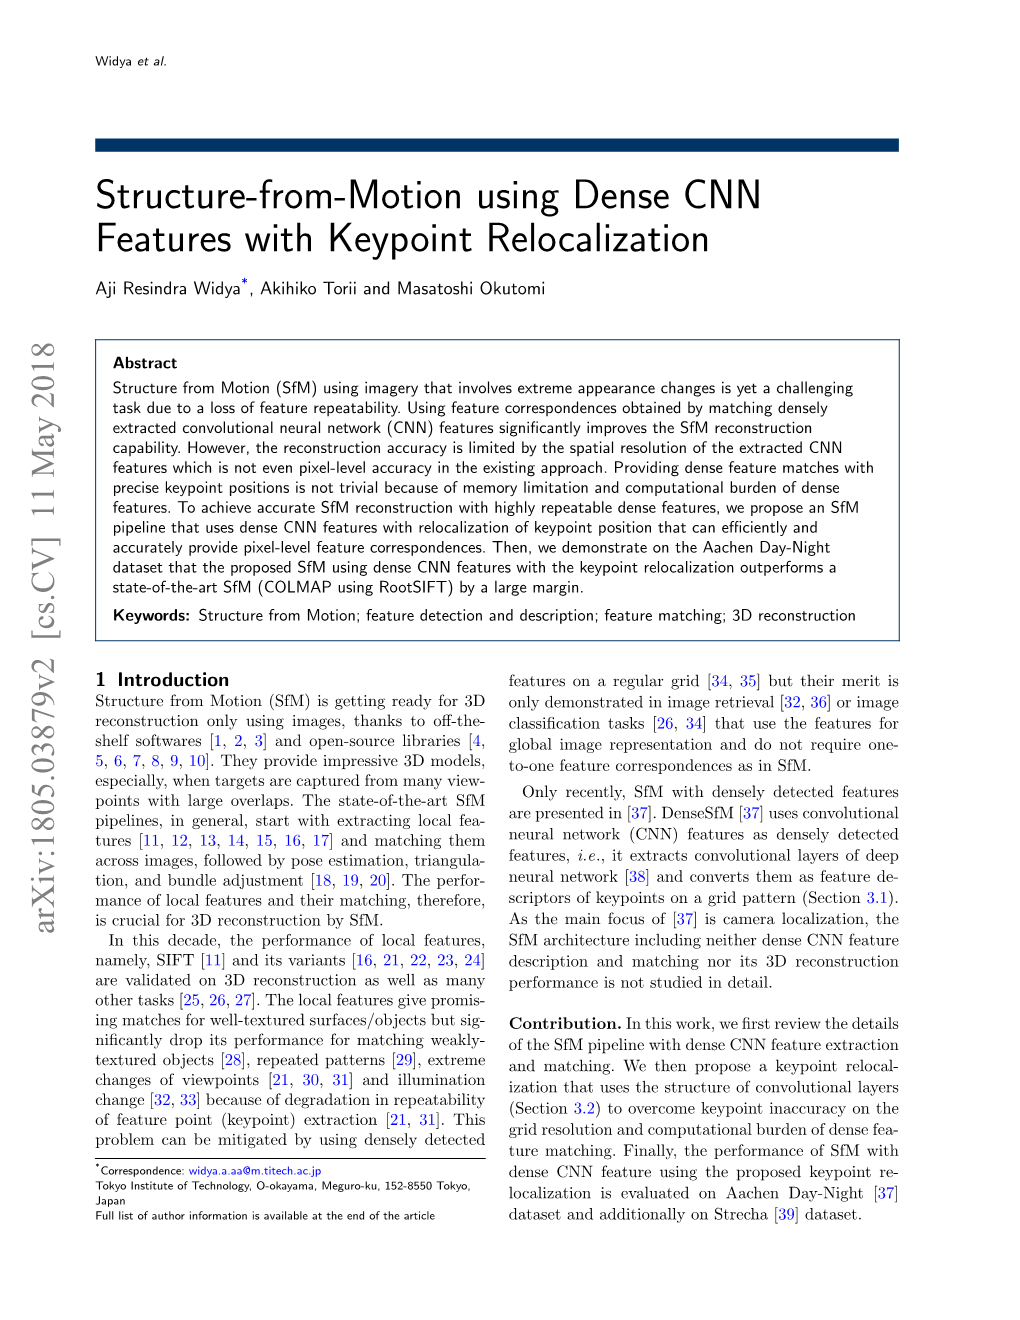 Structure-From-Motion Using Dense CNN Features with Keypoint Relocalization